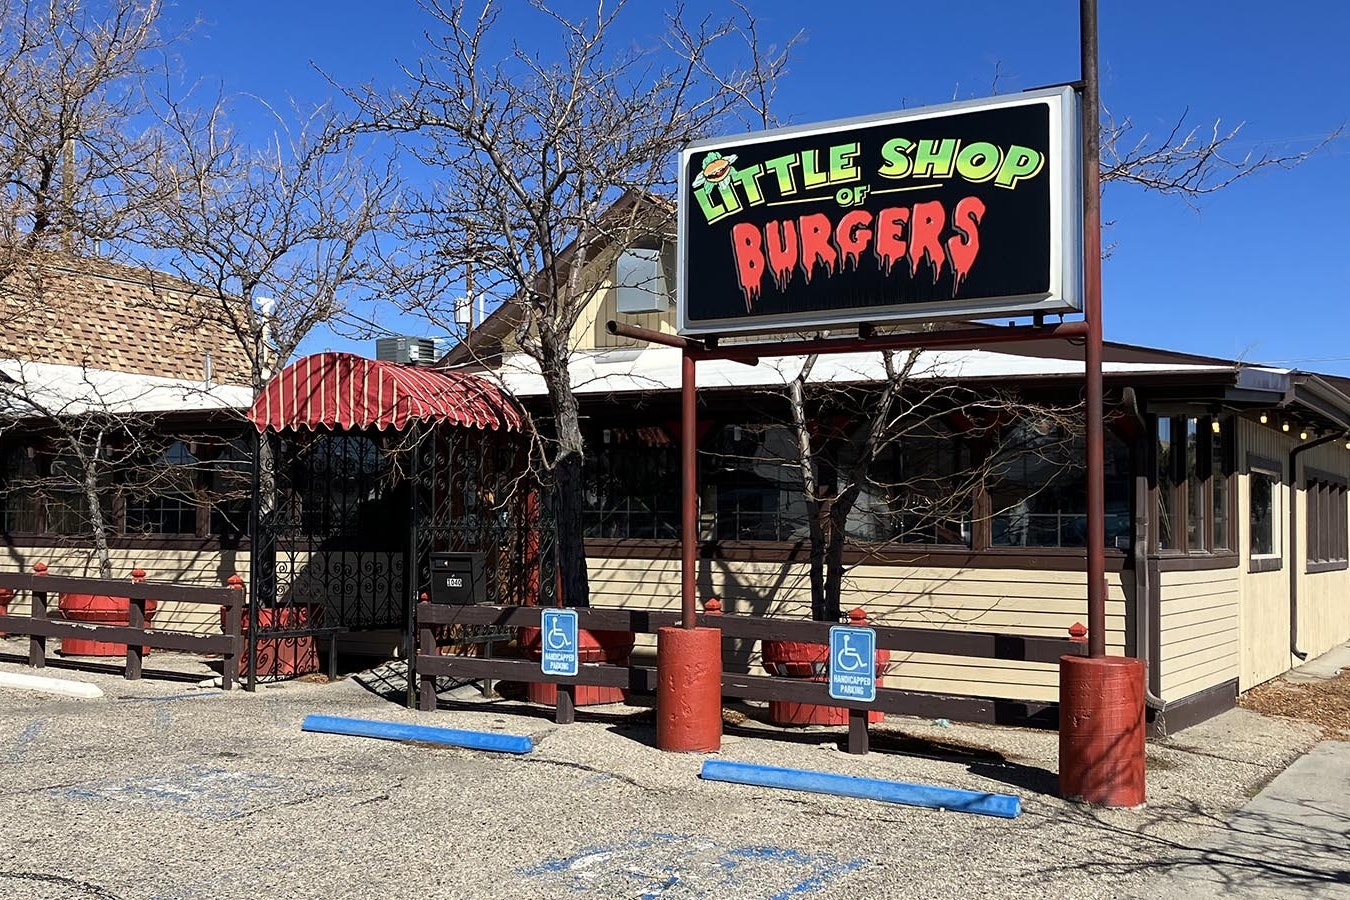 The Little Shop of Burgers restaurant on the north side of Casper was inspired by the movie “Little Shop of Horrors.”